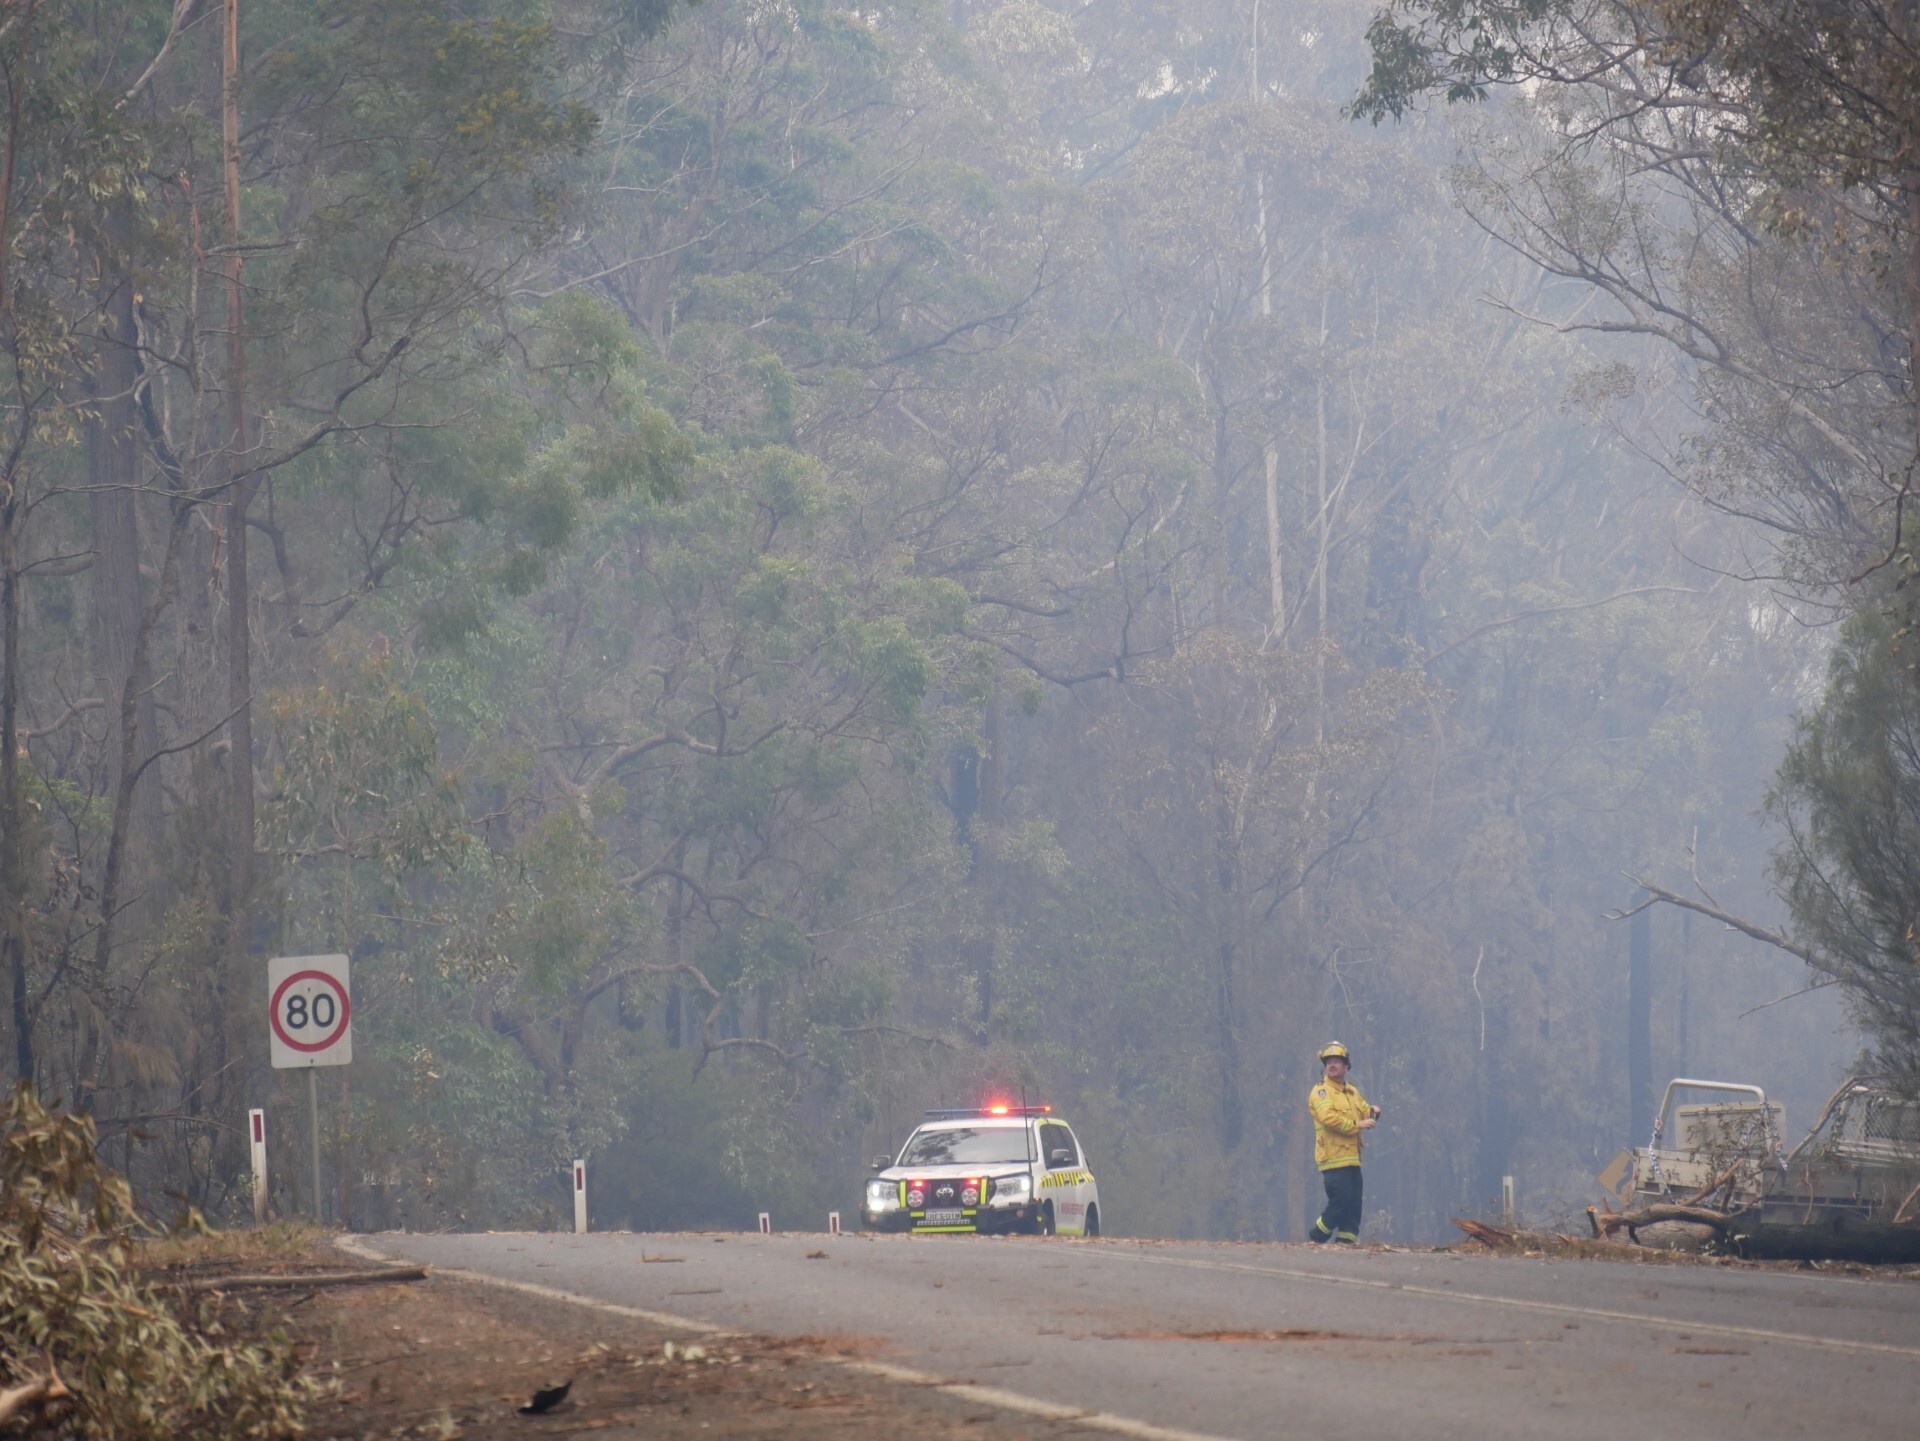 RFS worker stands in middle of road with car and flashing lights surrounded by trees.